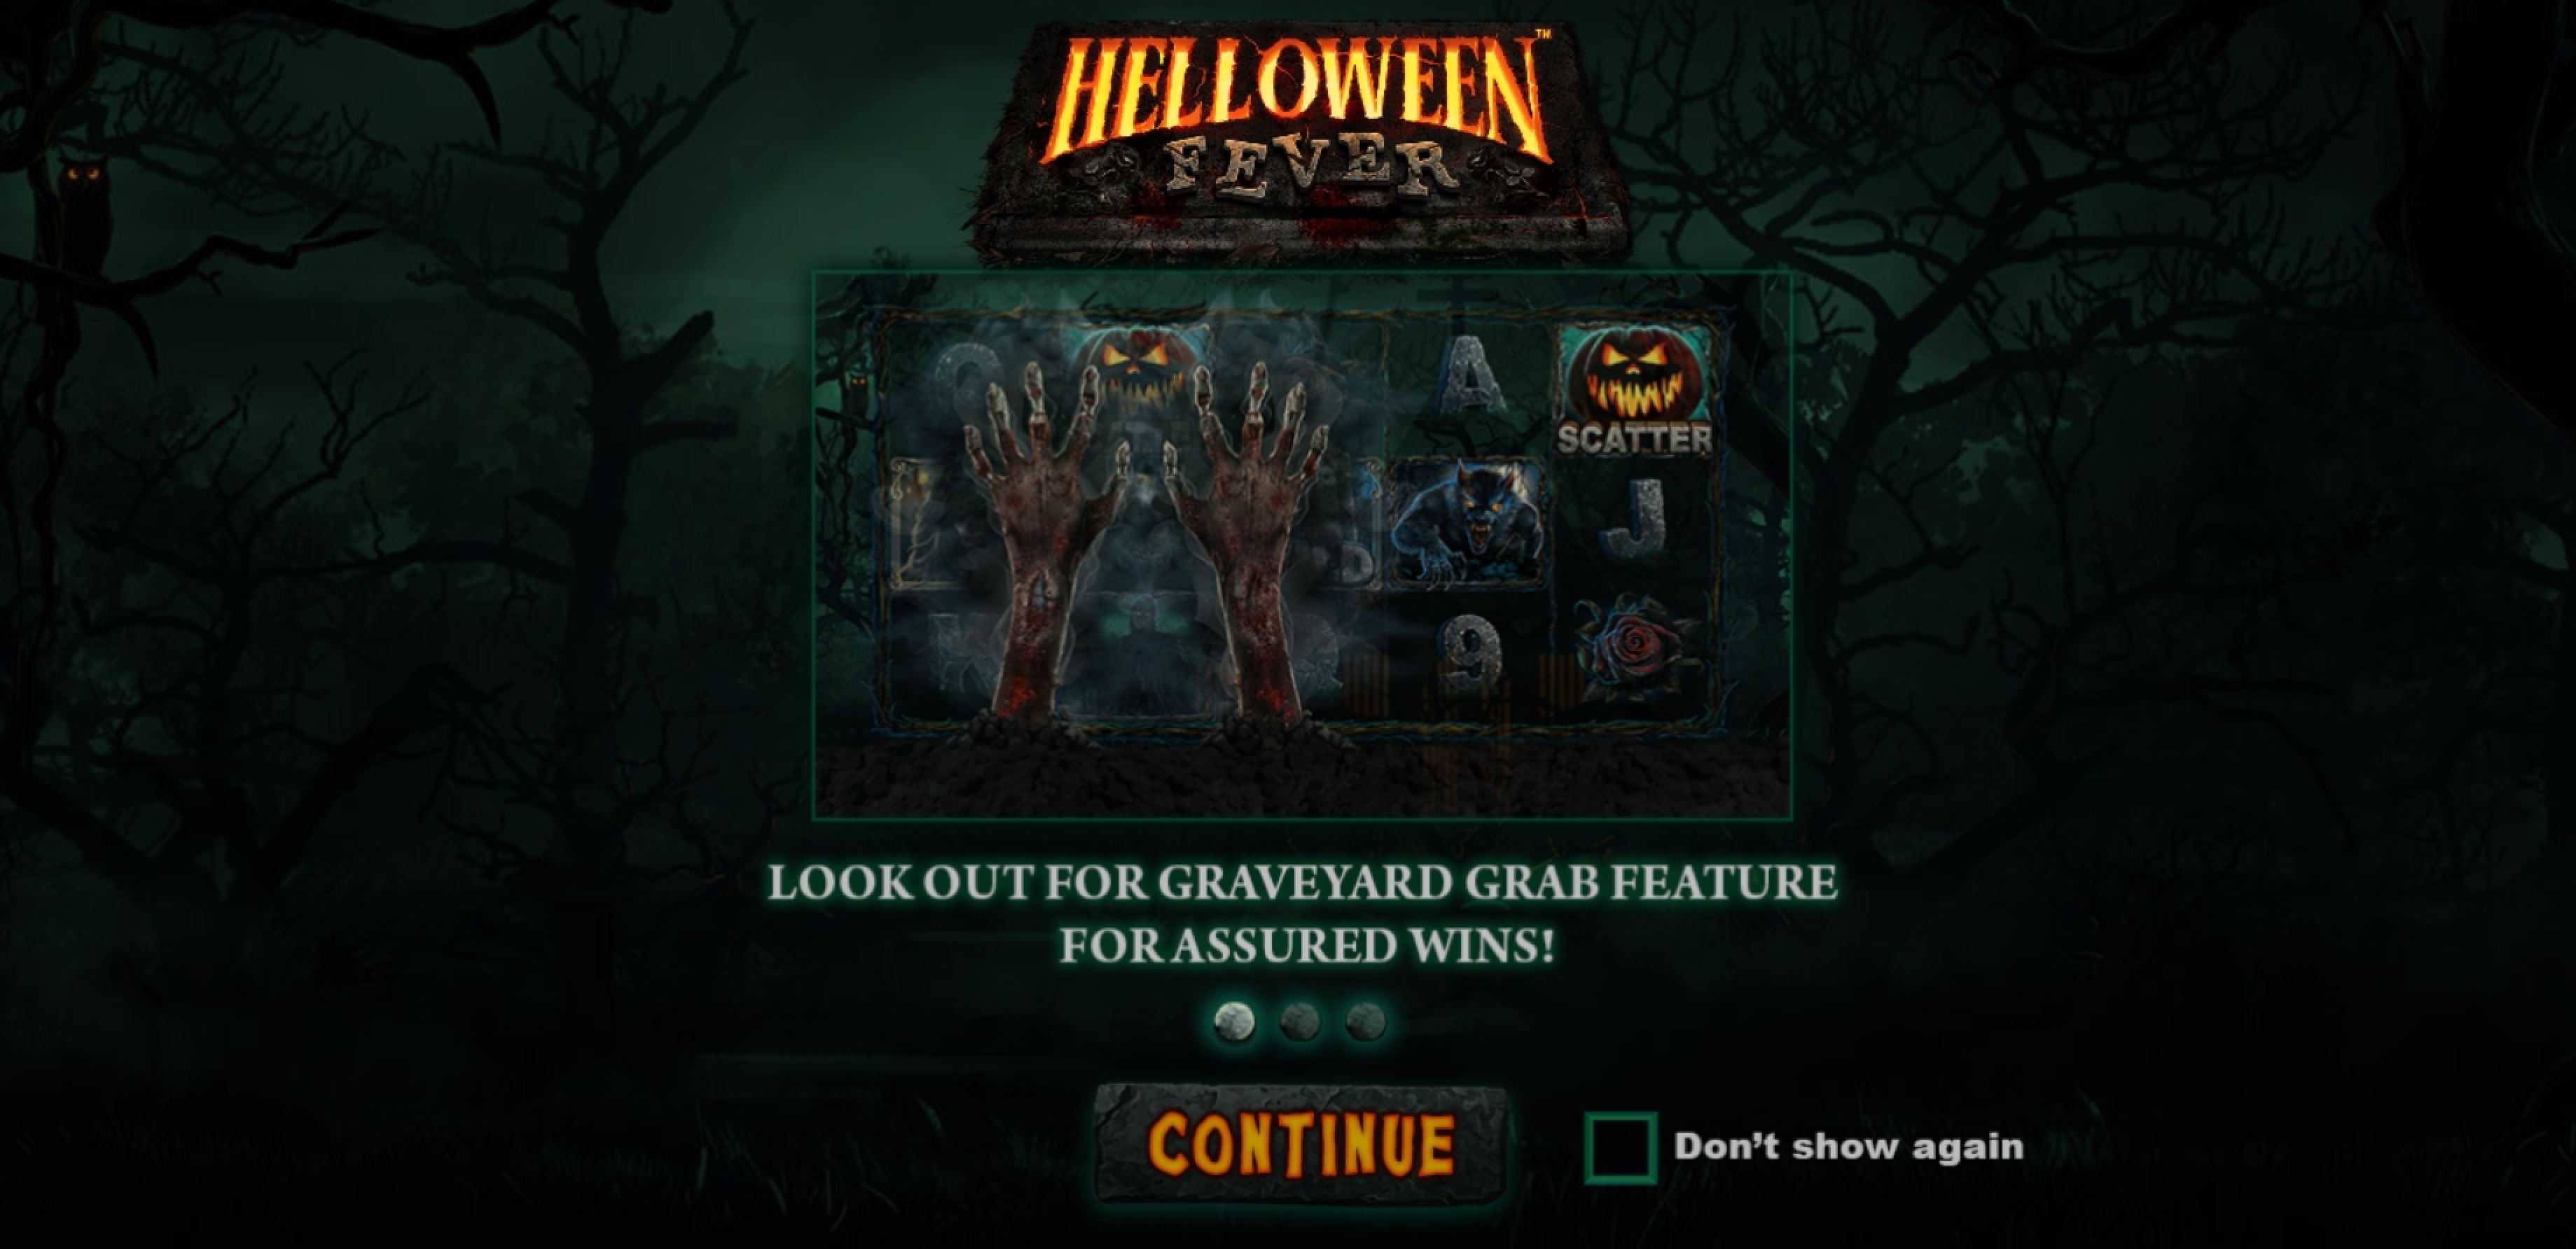 Play Helloween Fever Free Casino Slot Game by Plank Gaming